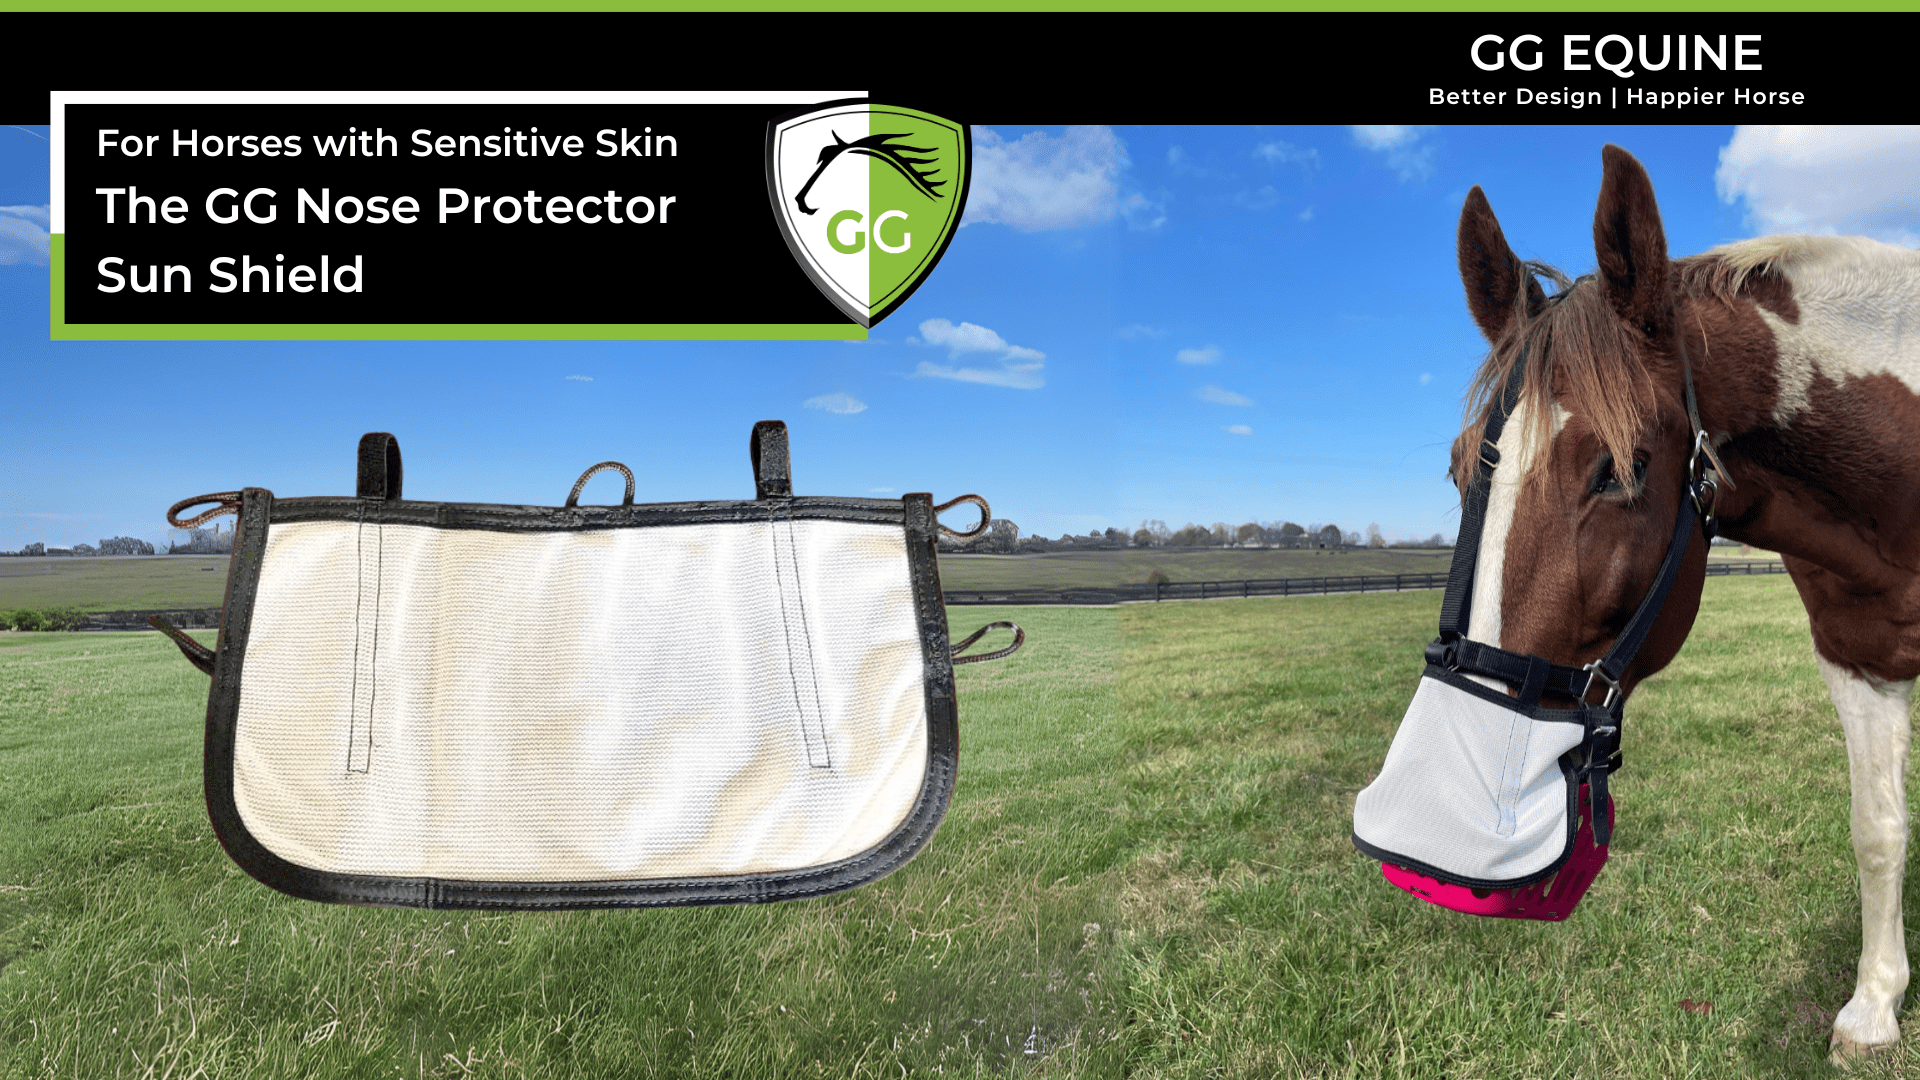 Load video: Introducing the GG Nose Protector Sun Shield, to help horses with sensitive skin and safeguard against dew poisoning.